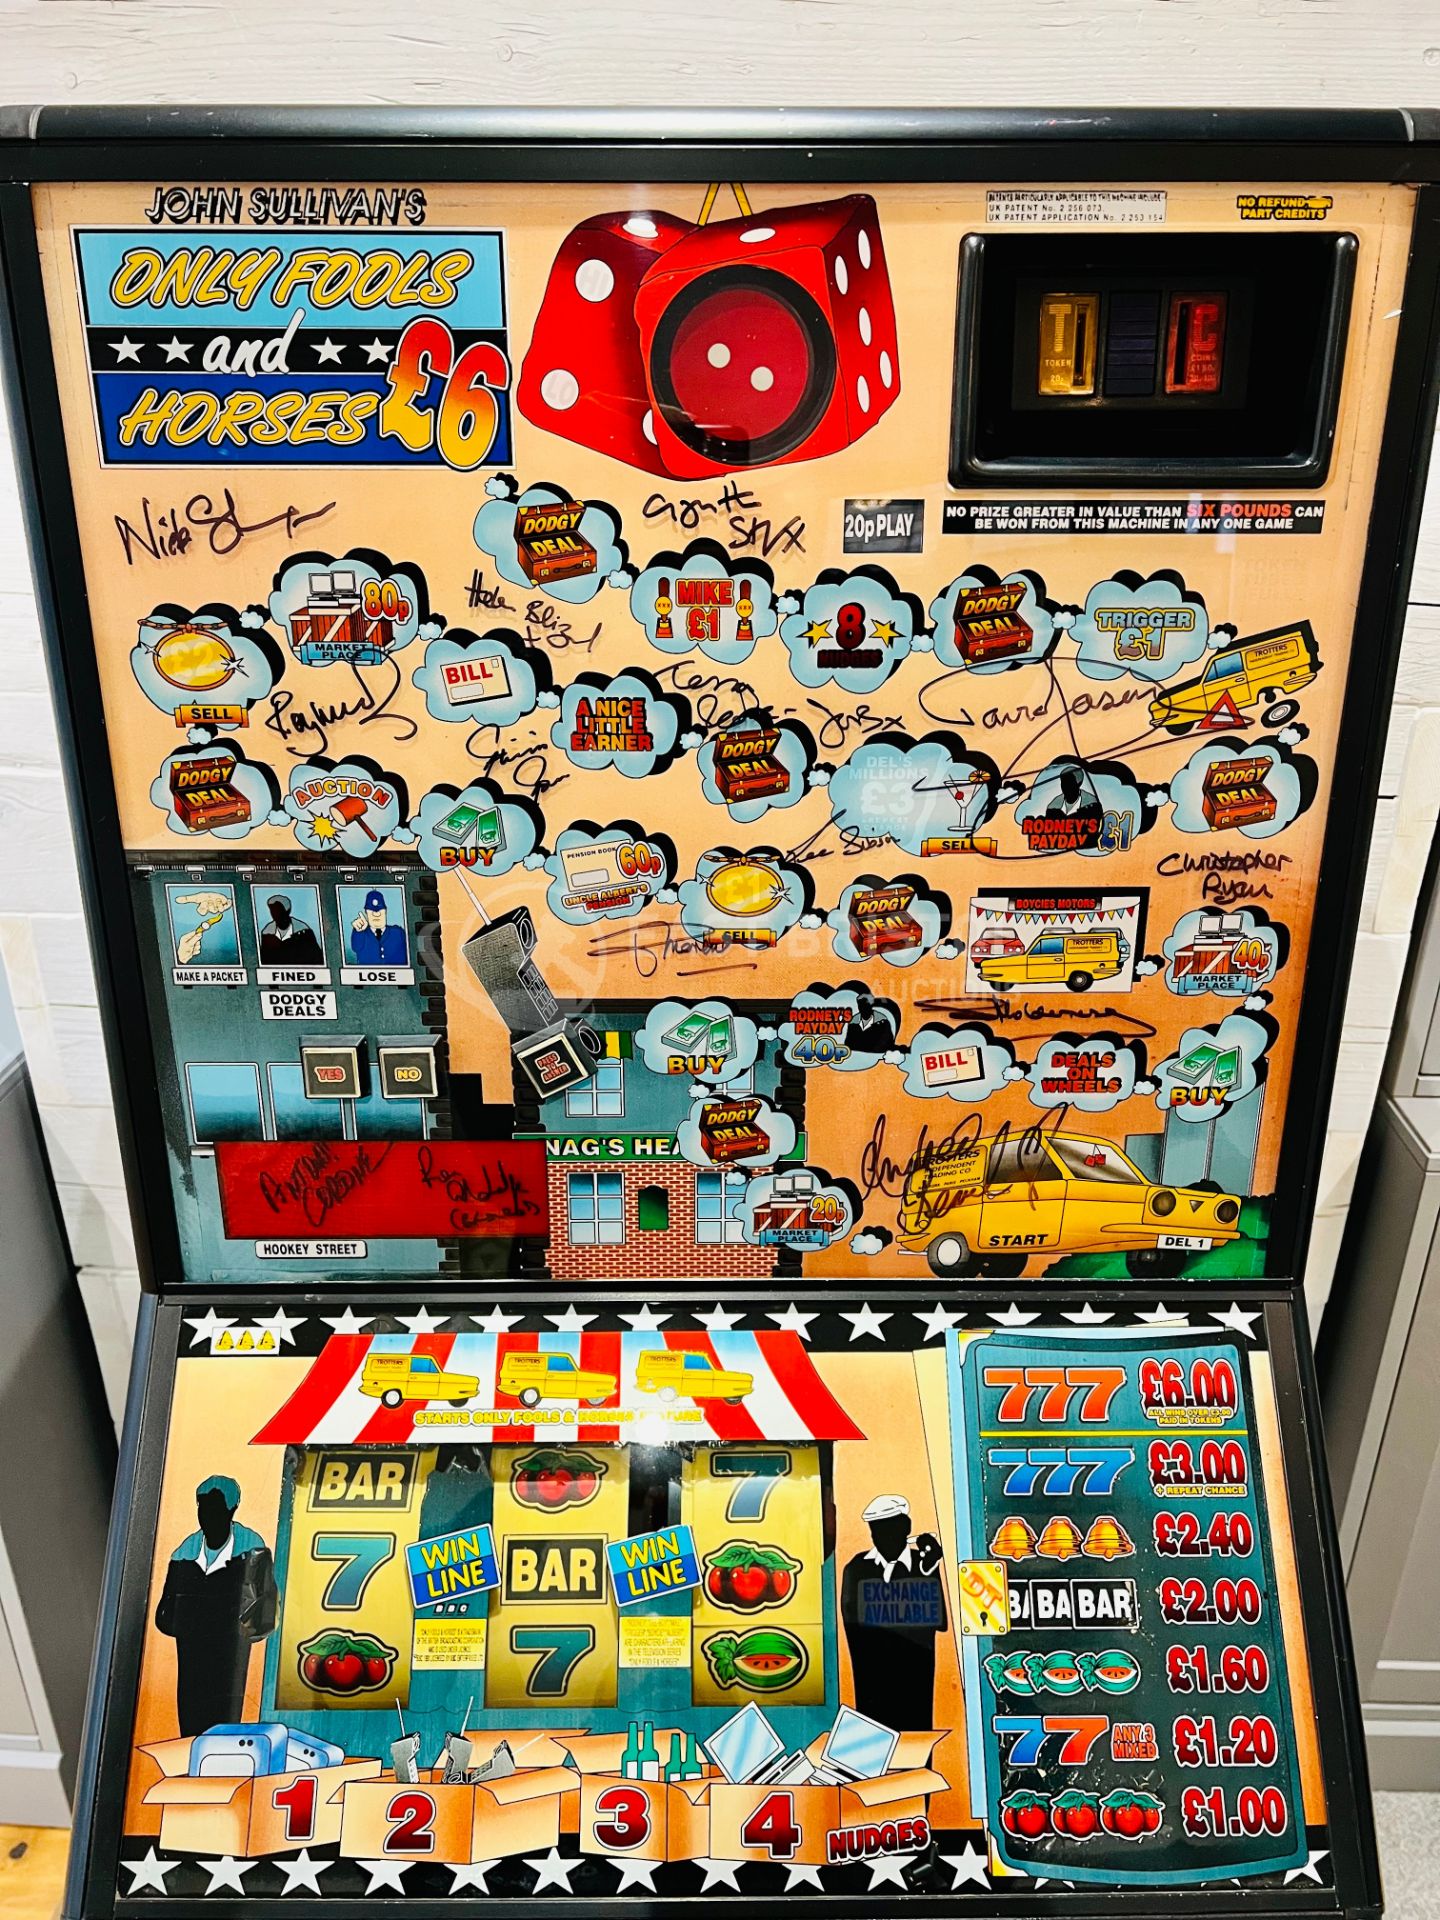 ONLY FOOLS & HORSES - SCARCE 'SPINNING DICE' FRUIT MACHINE - SIGNED - Image 3 of 11